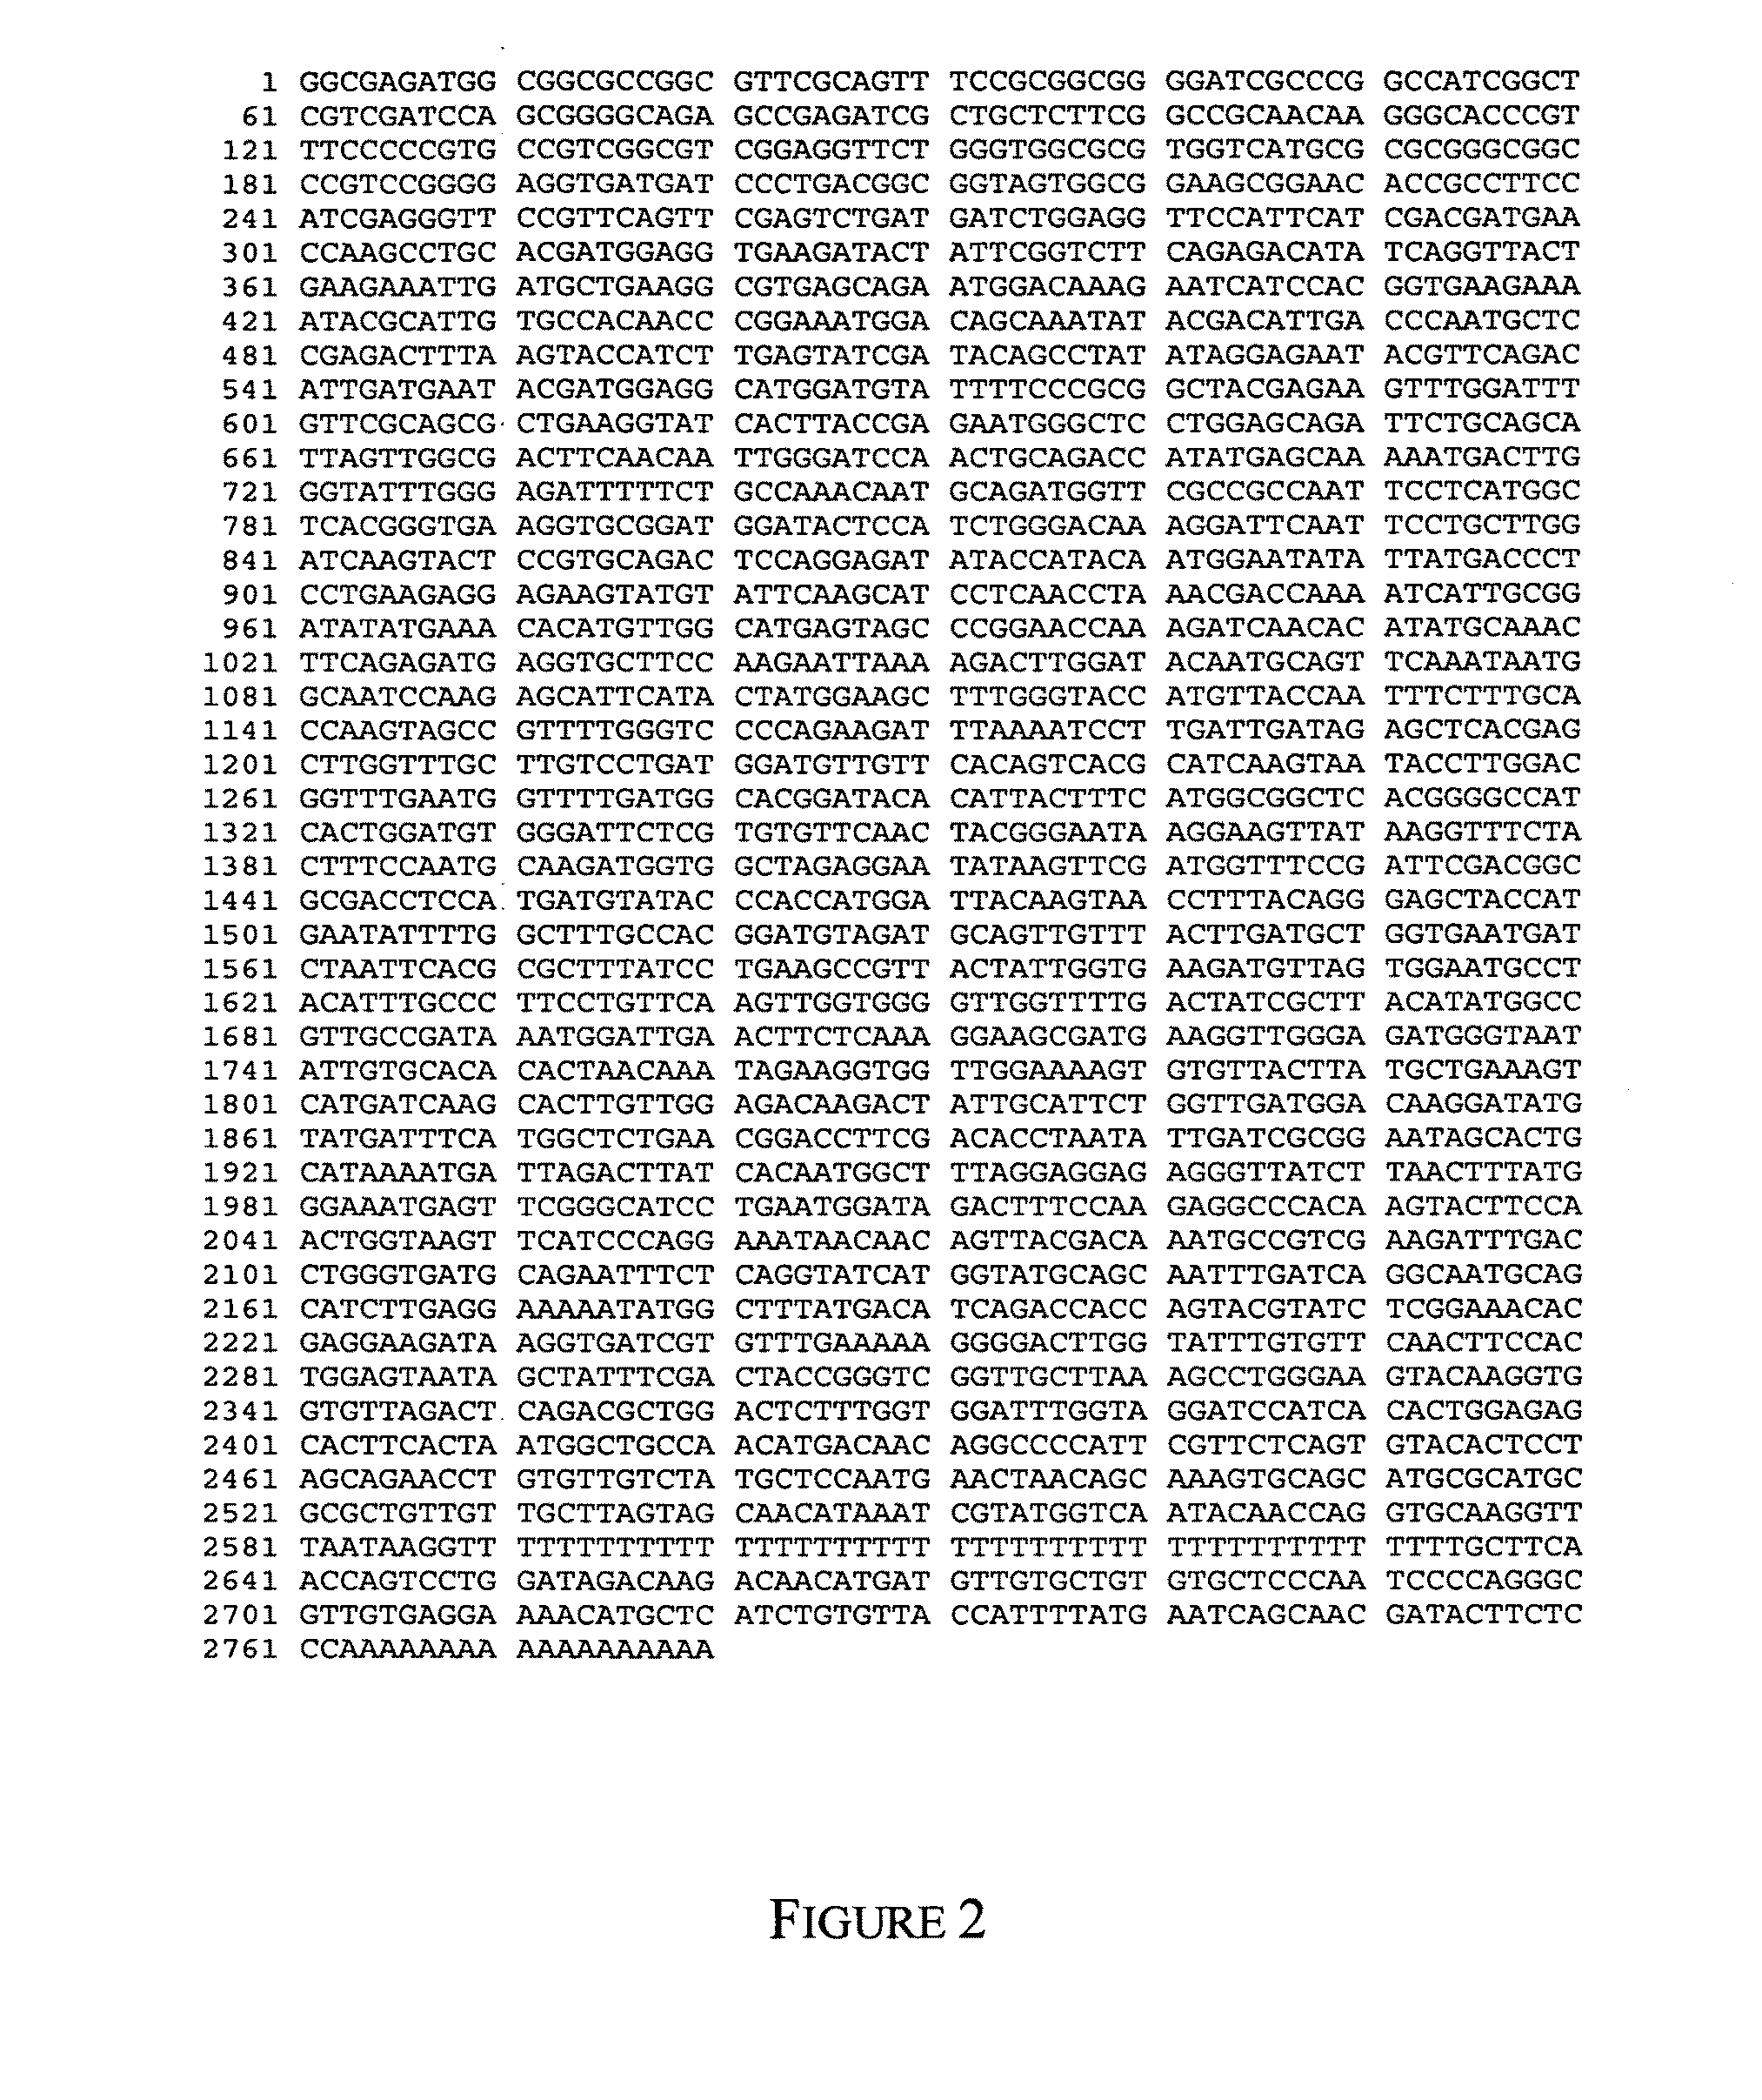 Barley with altered branching enzyme activity and starch and starch containing products with an increased amylose content